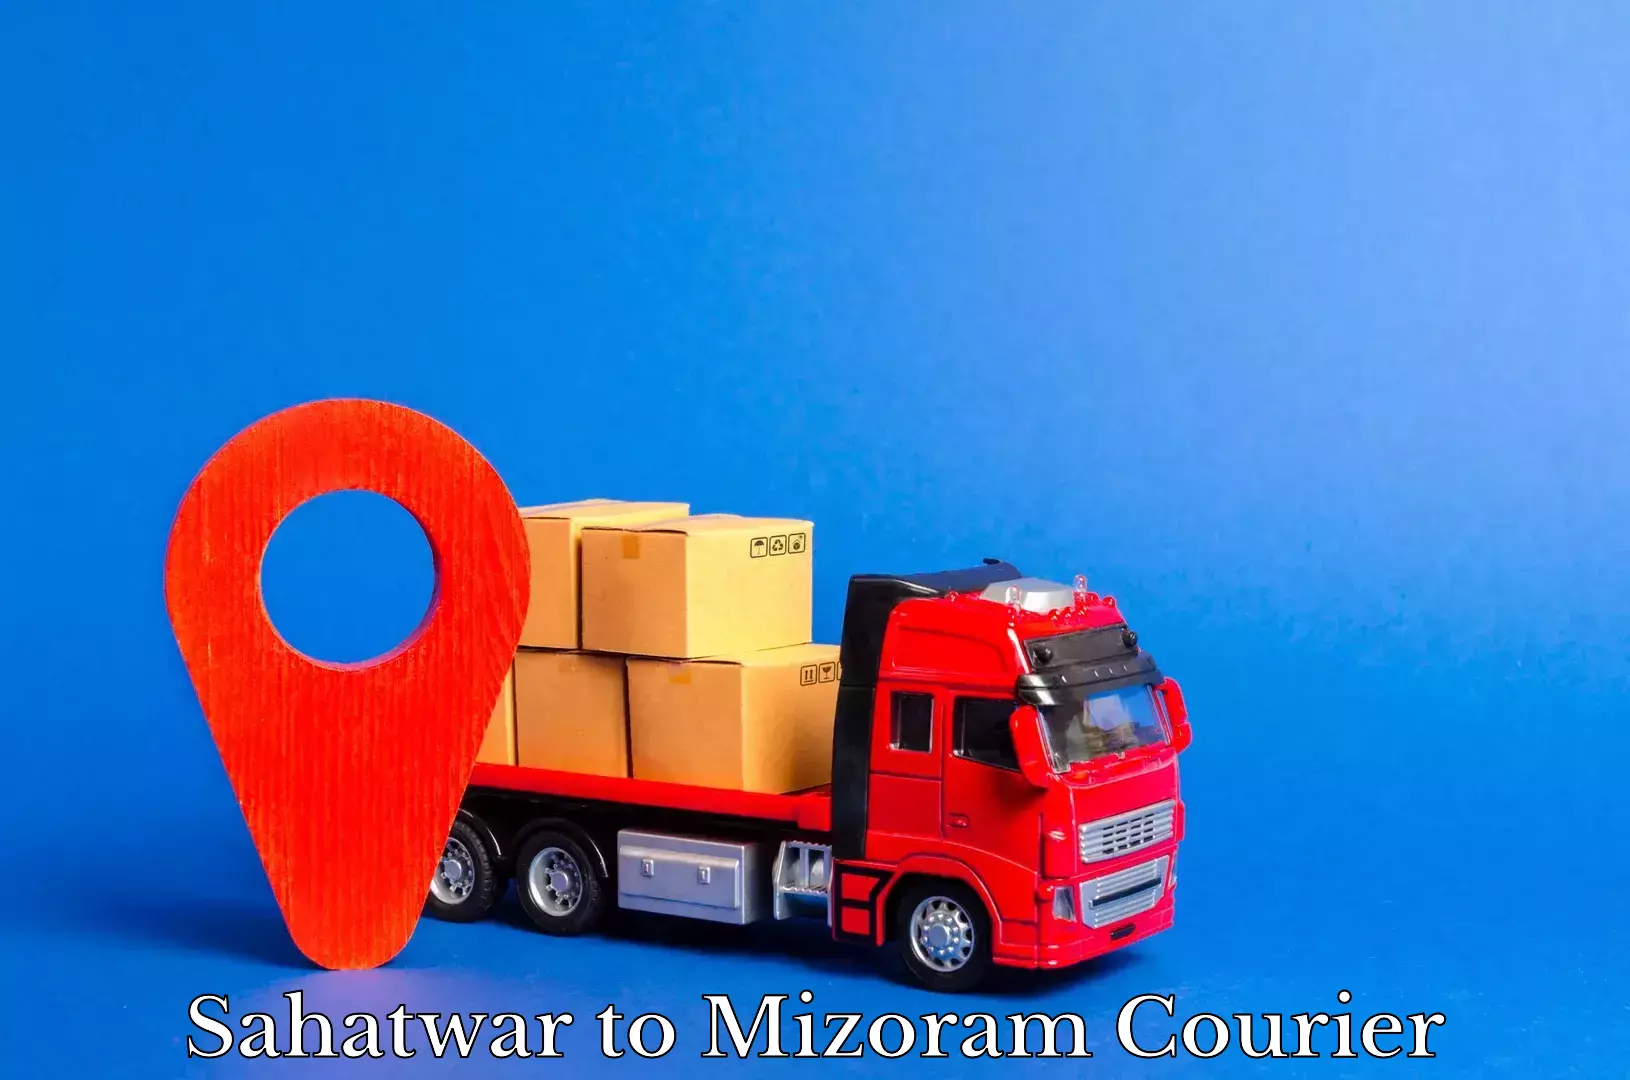 State-of-the-art courier technology in Sahatwar to Mizoram